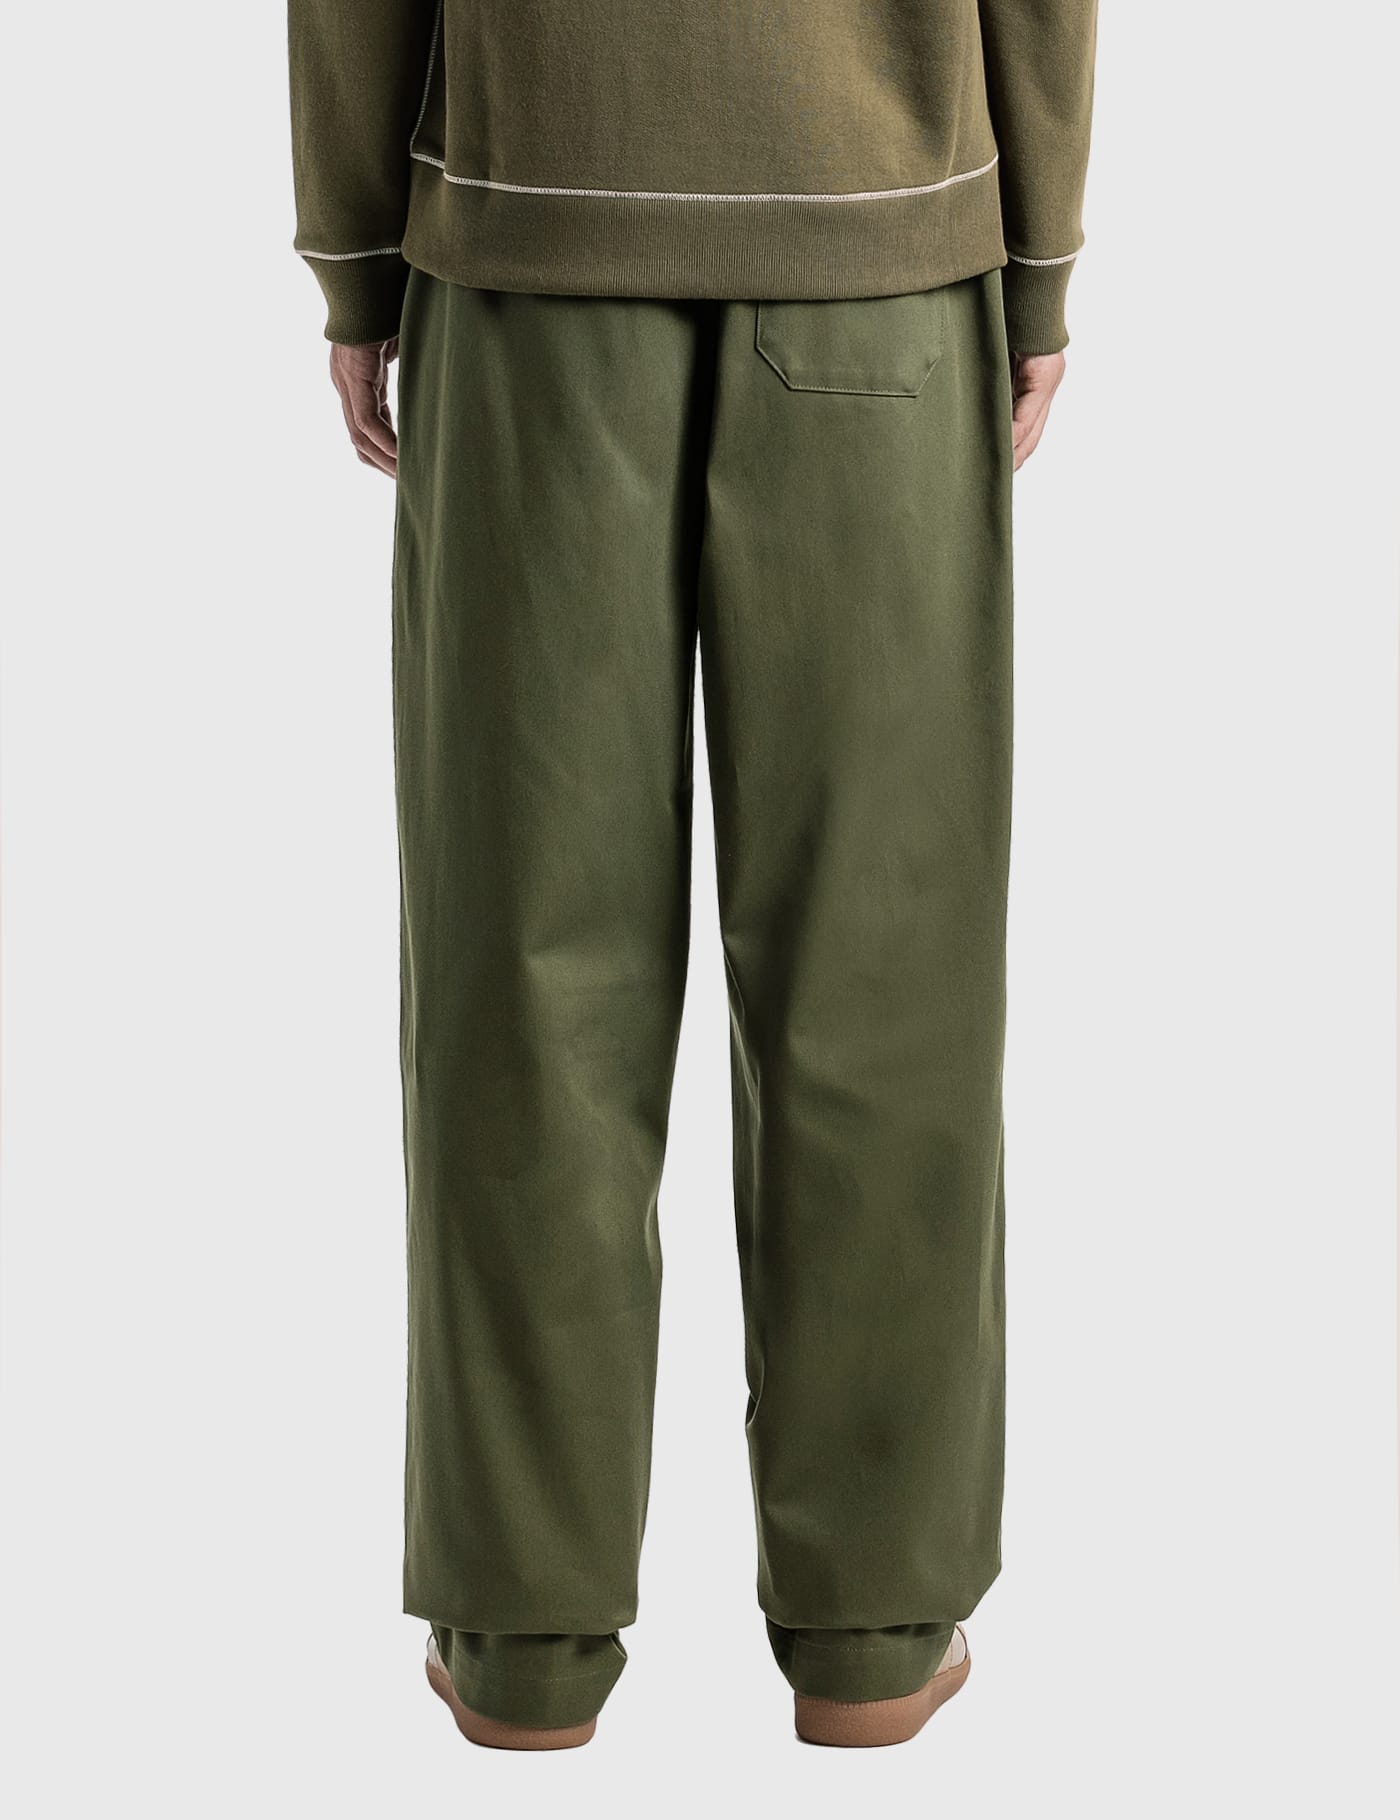 Loewe - Drawstring Trousers | HBX - Globally Curated Fashion and 